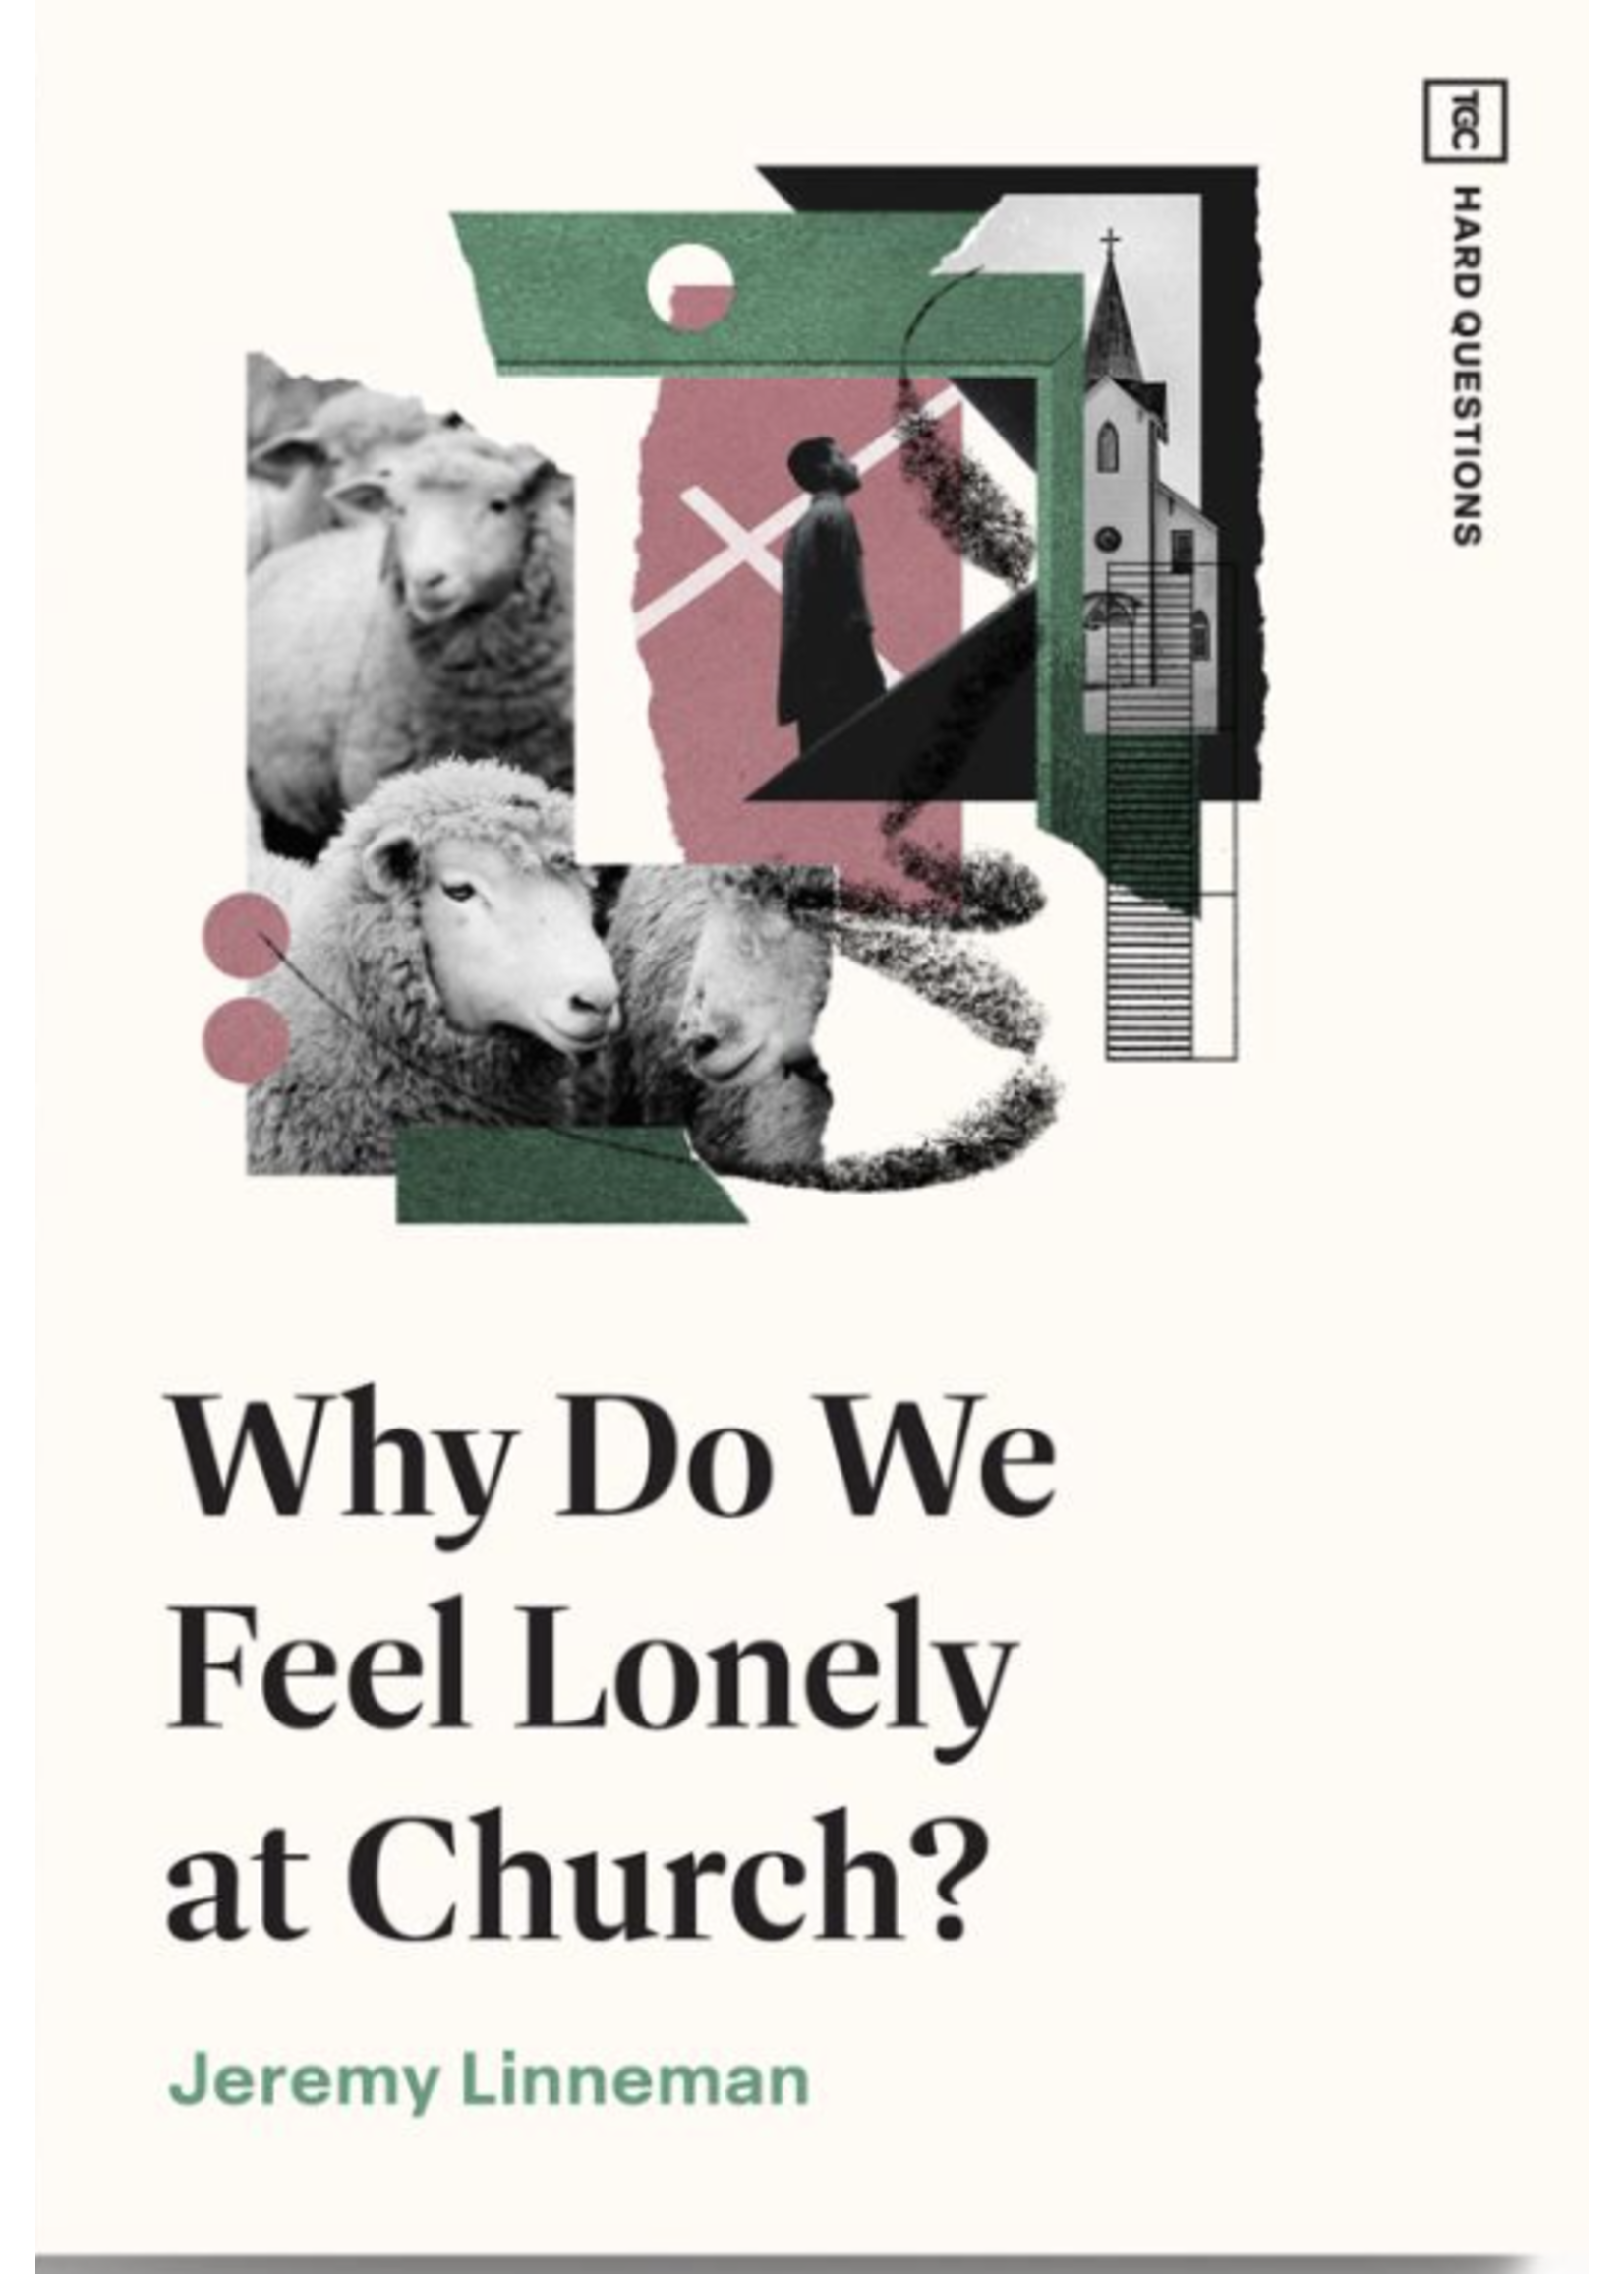 Why do we Feel Lonely at Church [Jeremy Linneman]